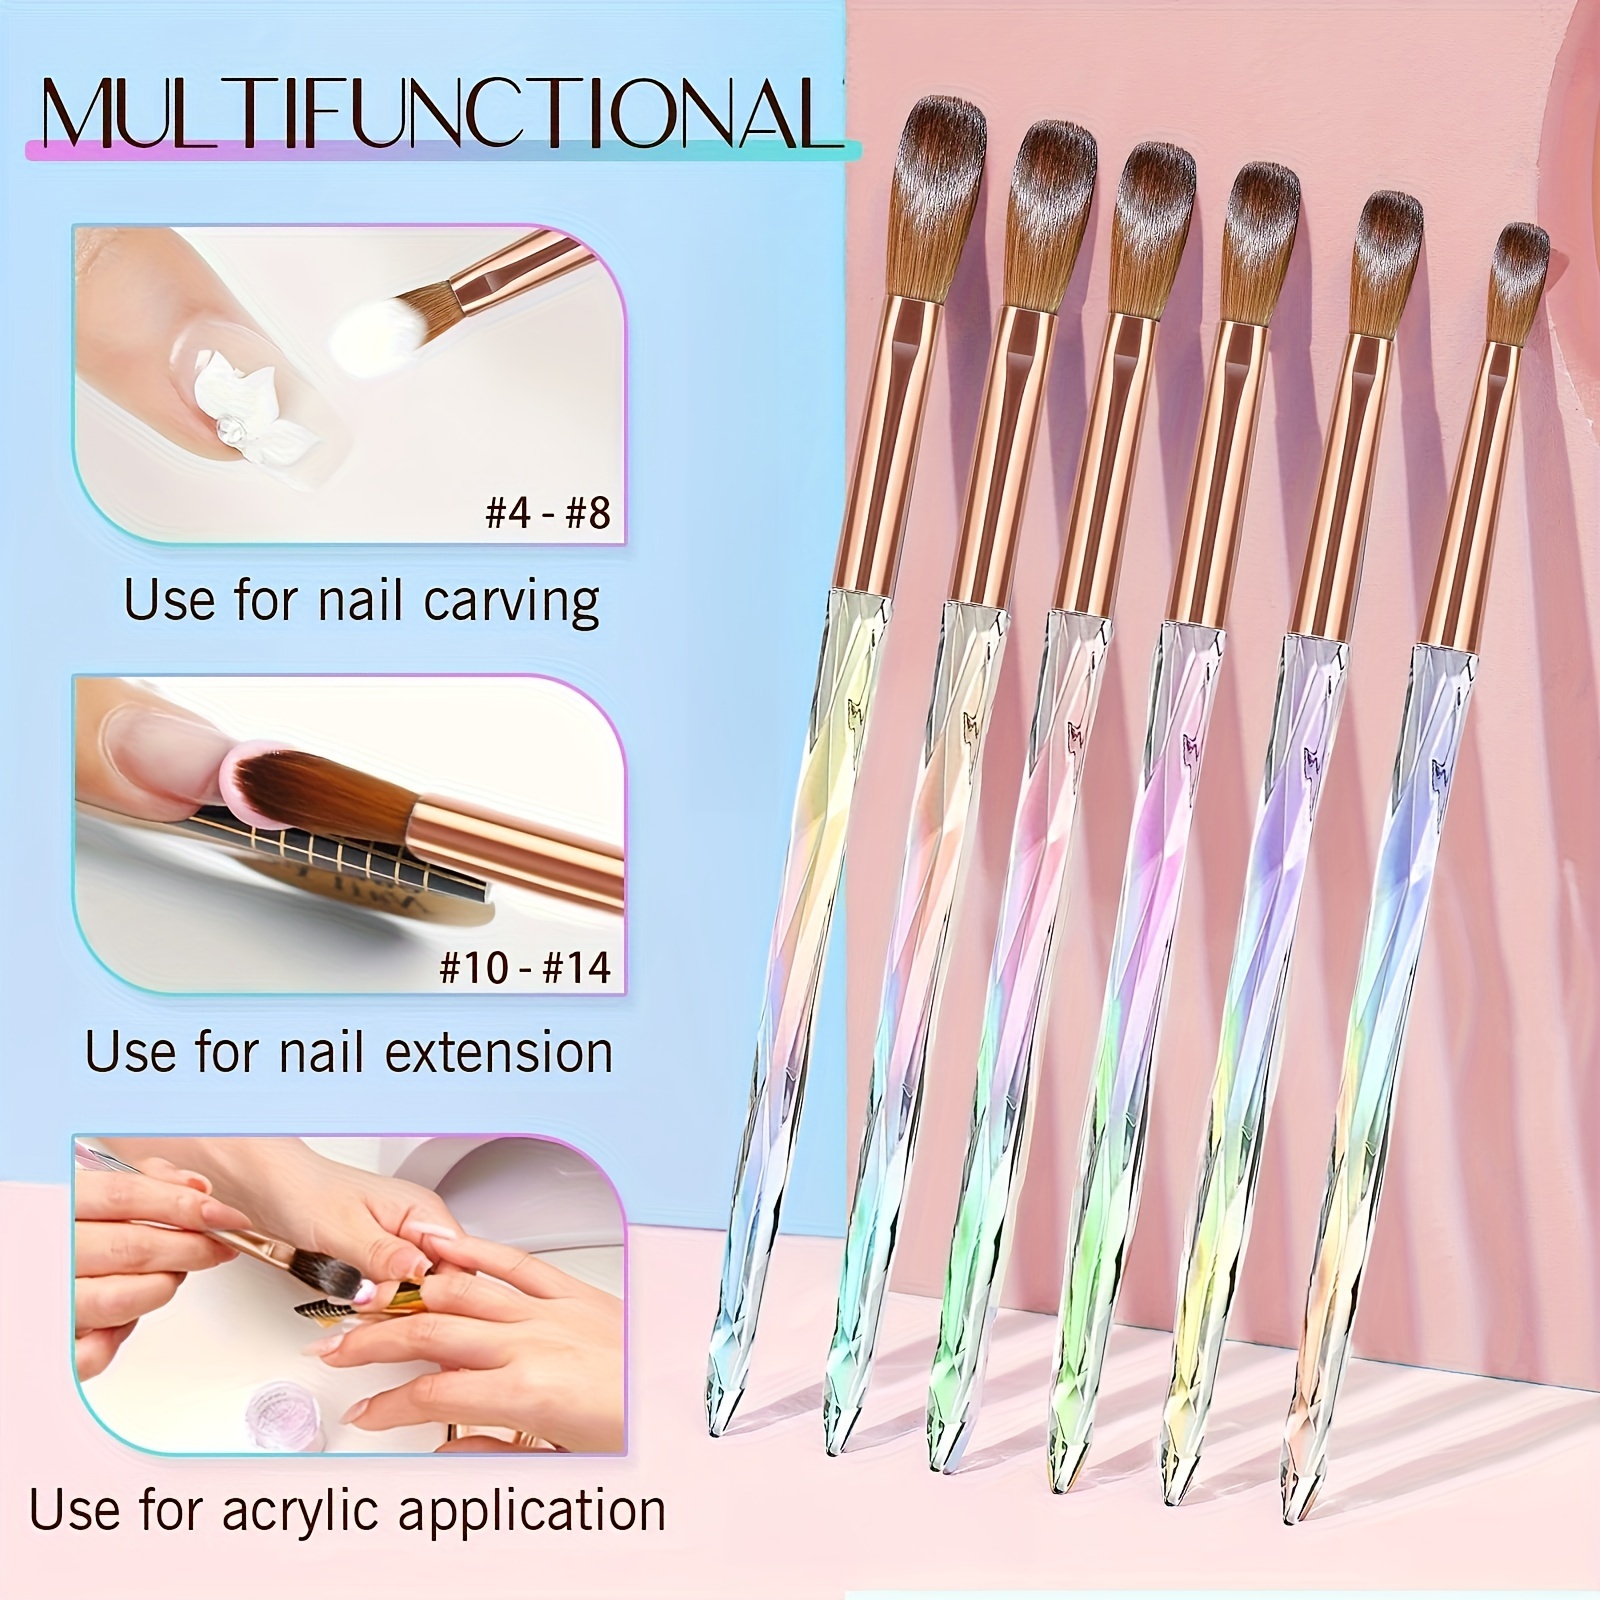 

6-piece Professional Acrylic Nail Brush Set For Beginners, Easy Extension & Carving, Multifunctional Nail Art Brushes For Acrylic Application, High-quality Powder Smoothing, Unscented